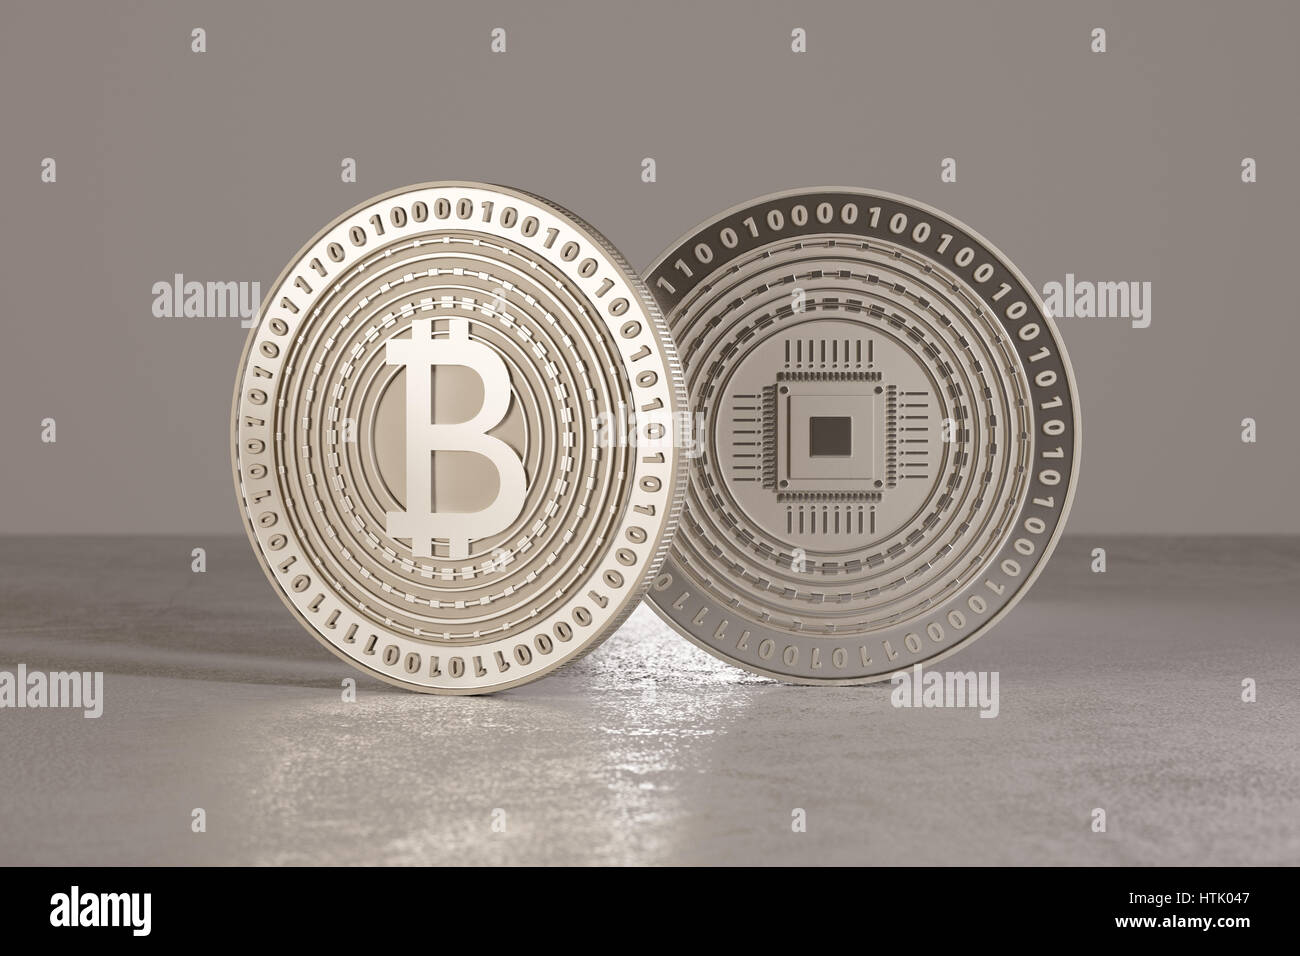 Close-up of two bitcoins standing on metal floor and blurry background Stock Photo